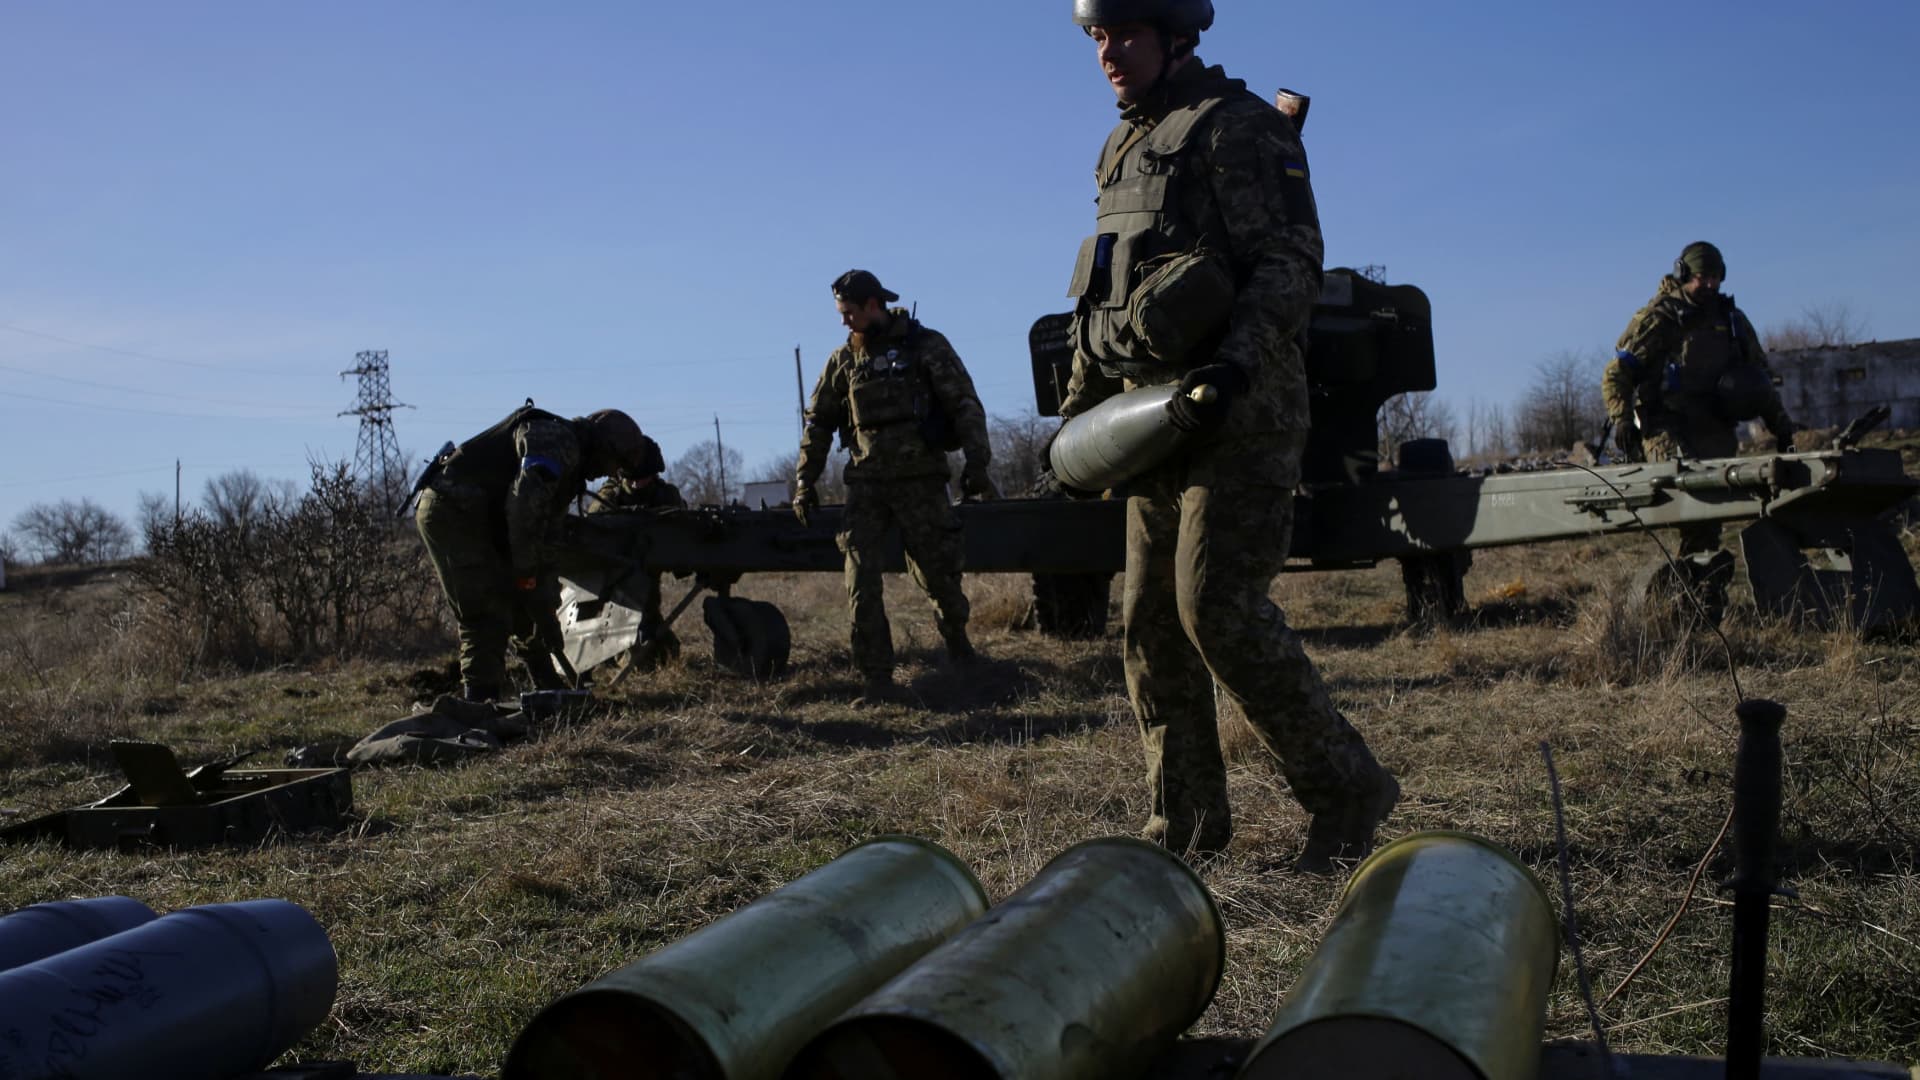 Members of the Ukrainian Volunteer Corps prepare howitzer, as Russia's attack on Ukraine continues, at a position in Zaporizhzhia region, Ukraine March 28, 2022. Picture taken March 28, 2022. 